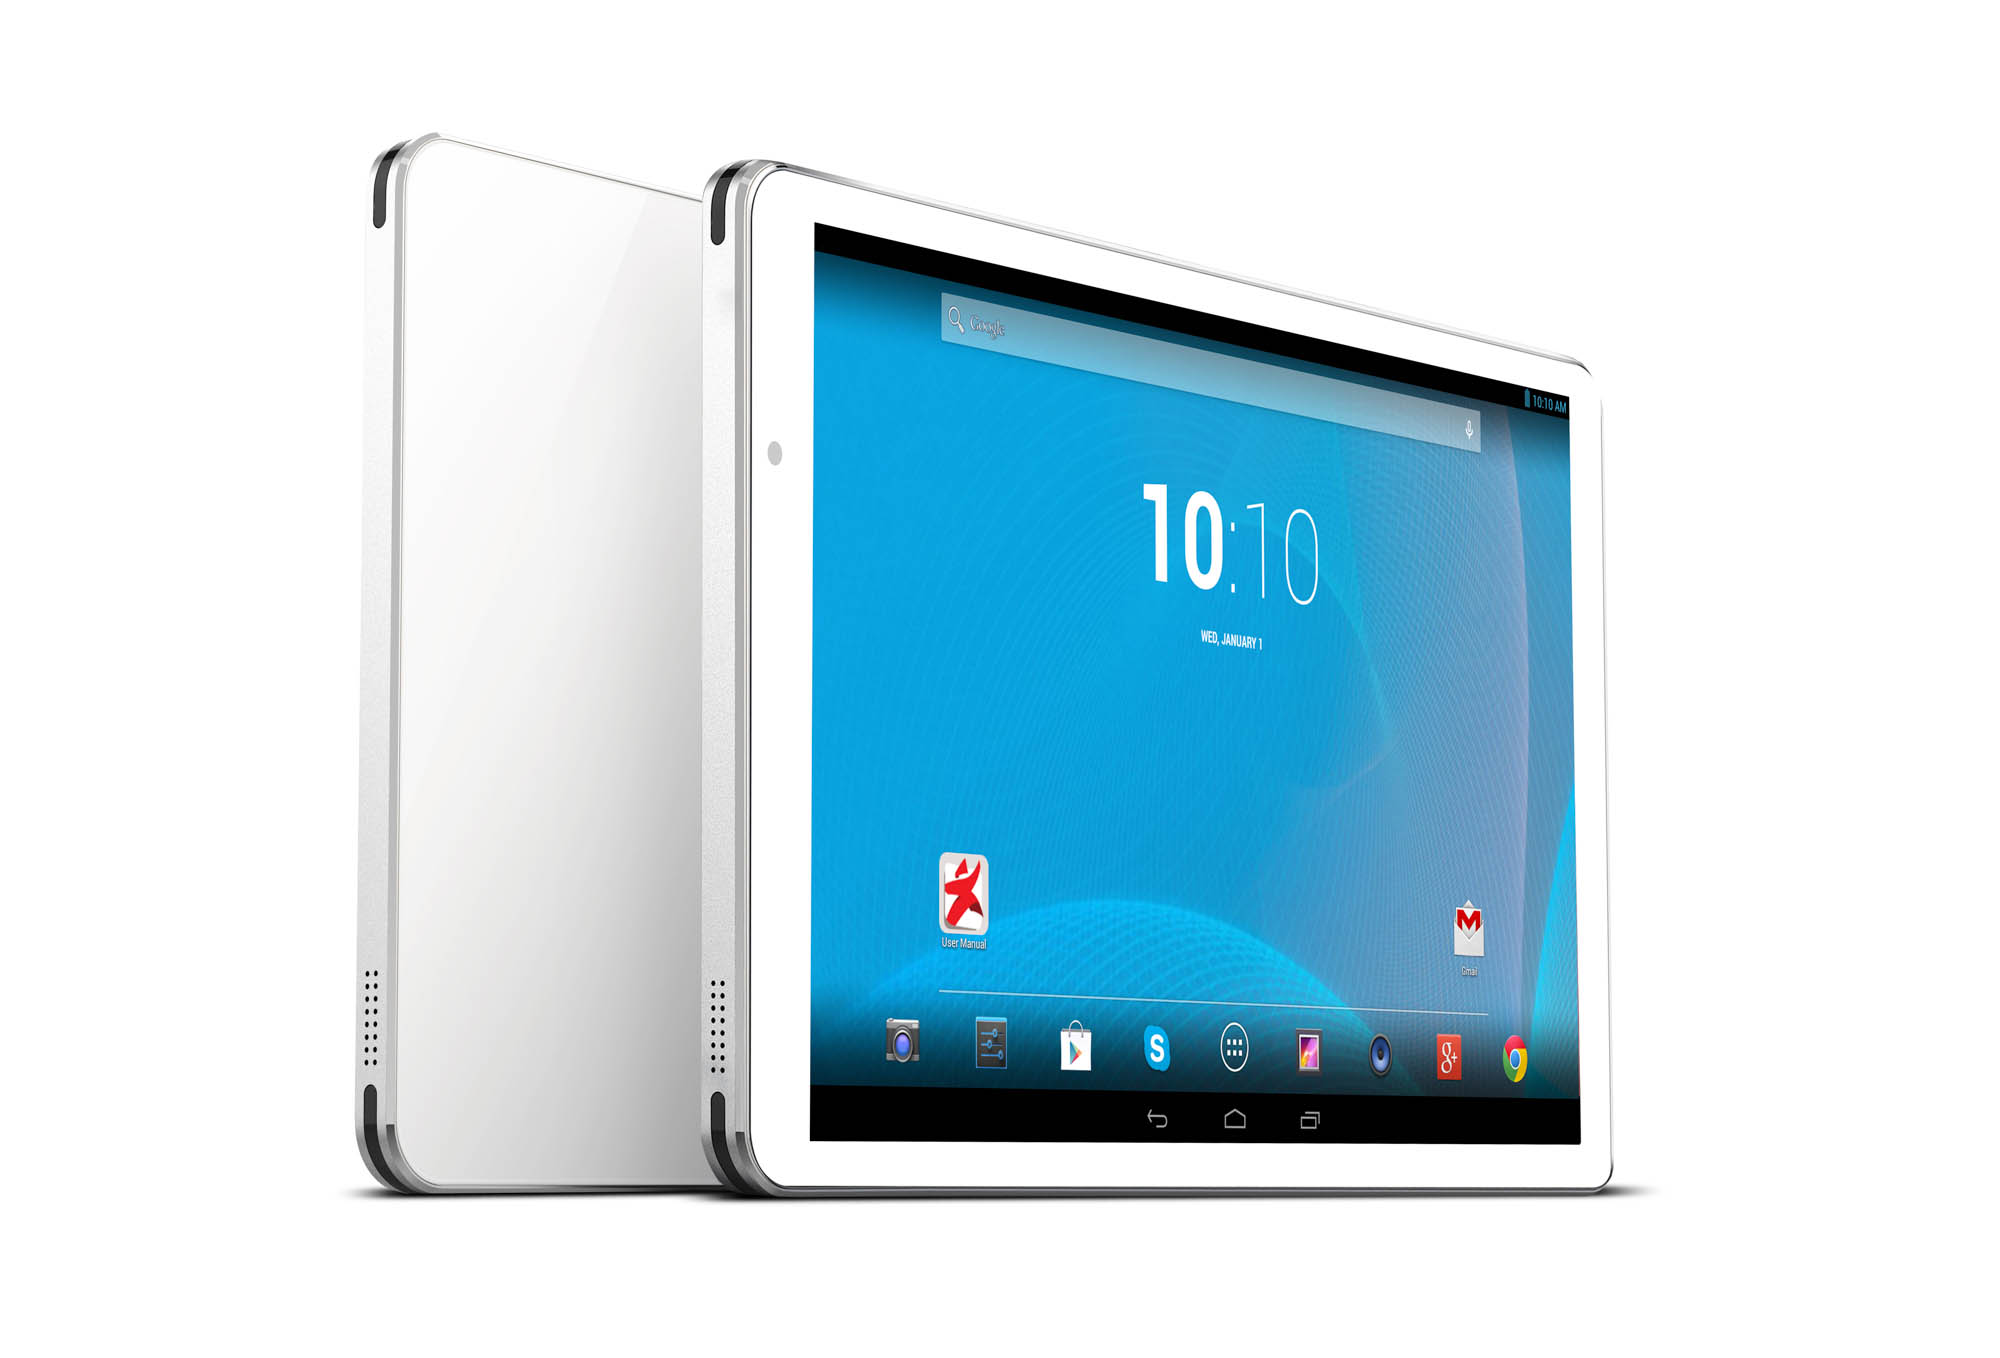 Starmobile Engage 9i Android tablet